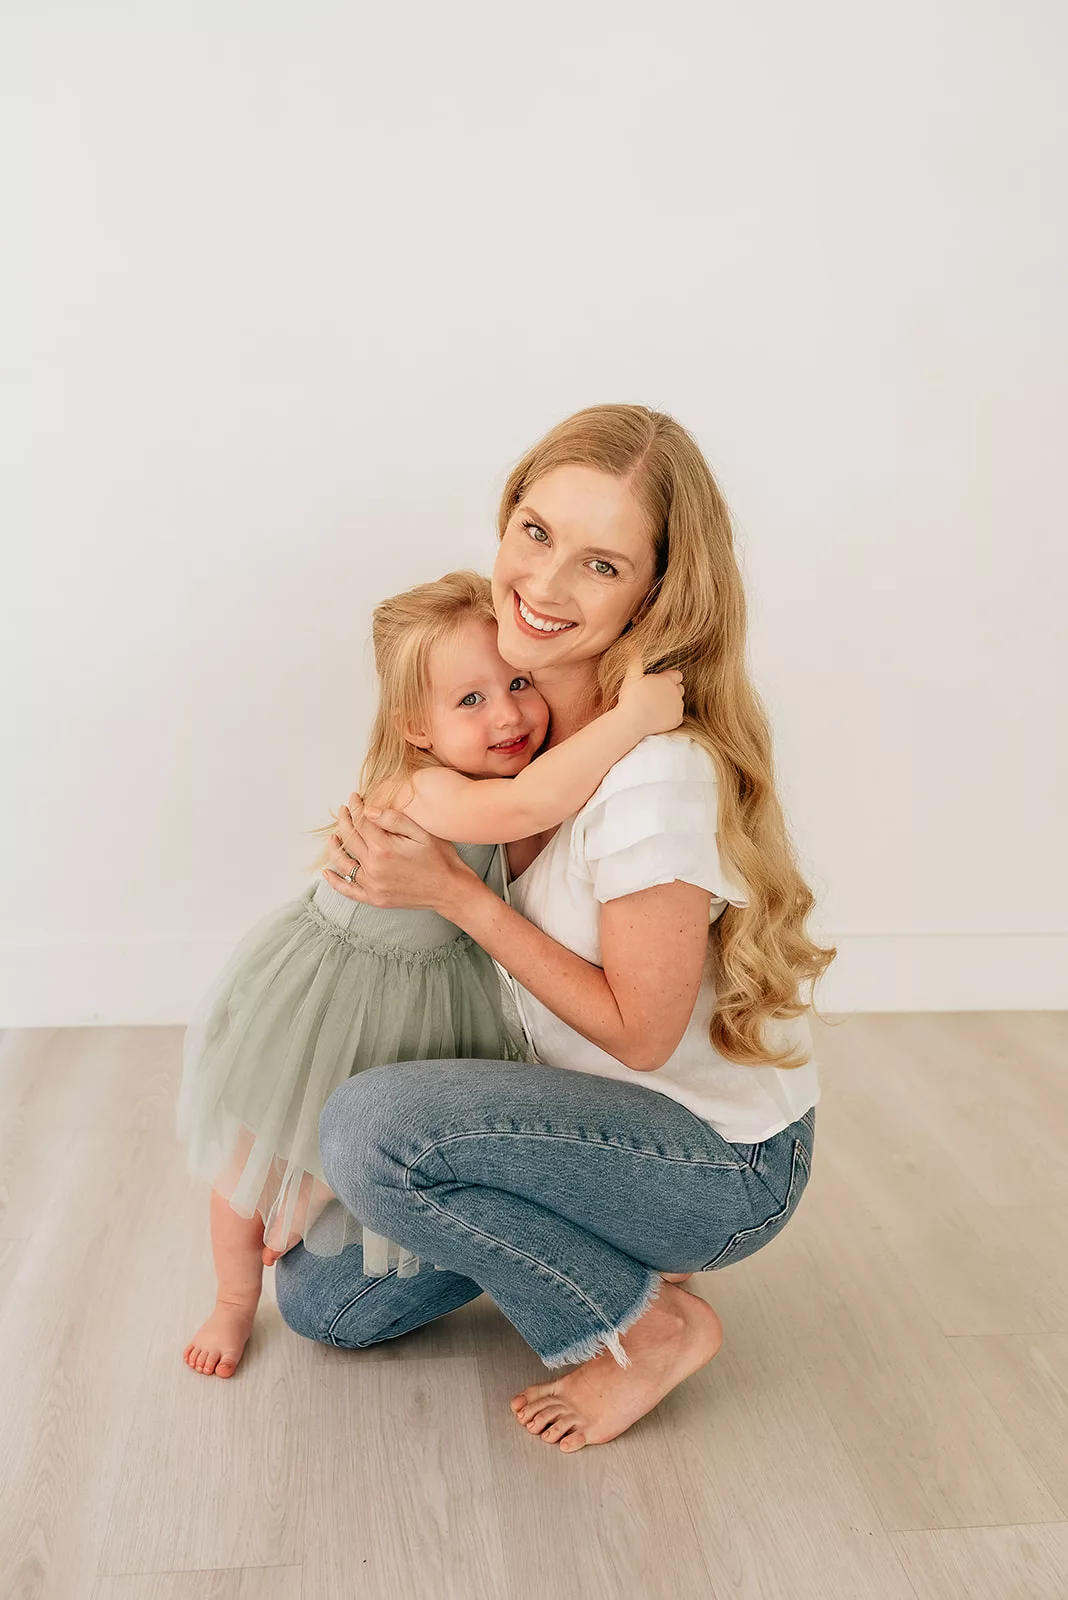 A mom in jeans kneels down to hug her toddler daughter in a green dress in a studio